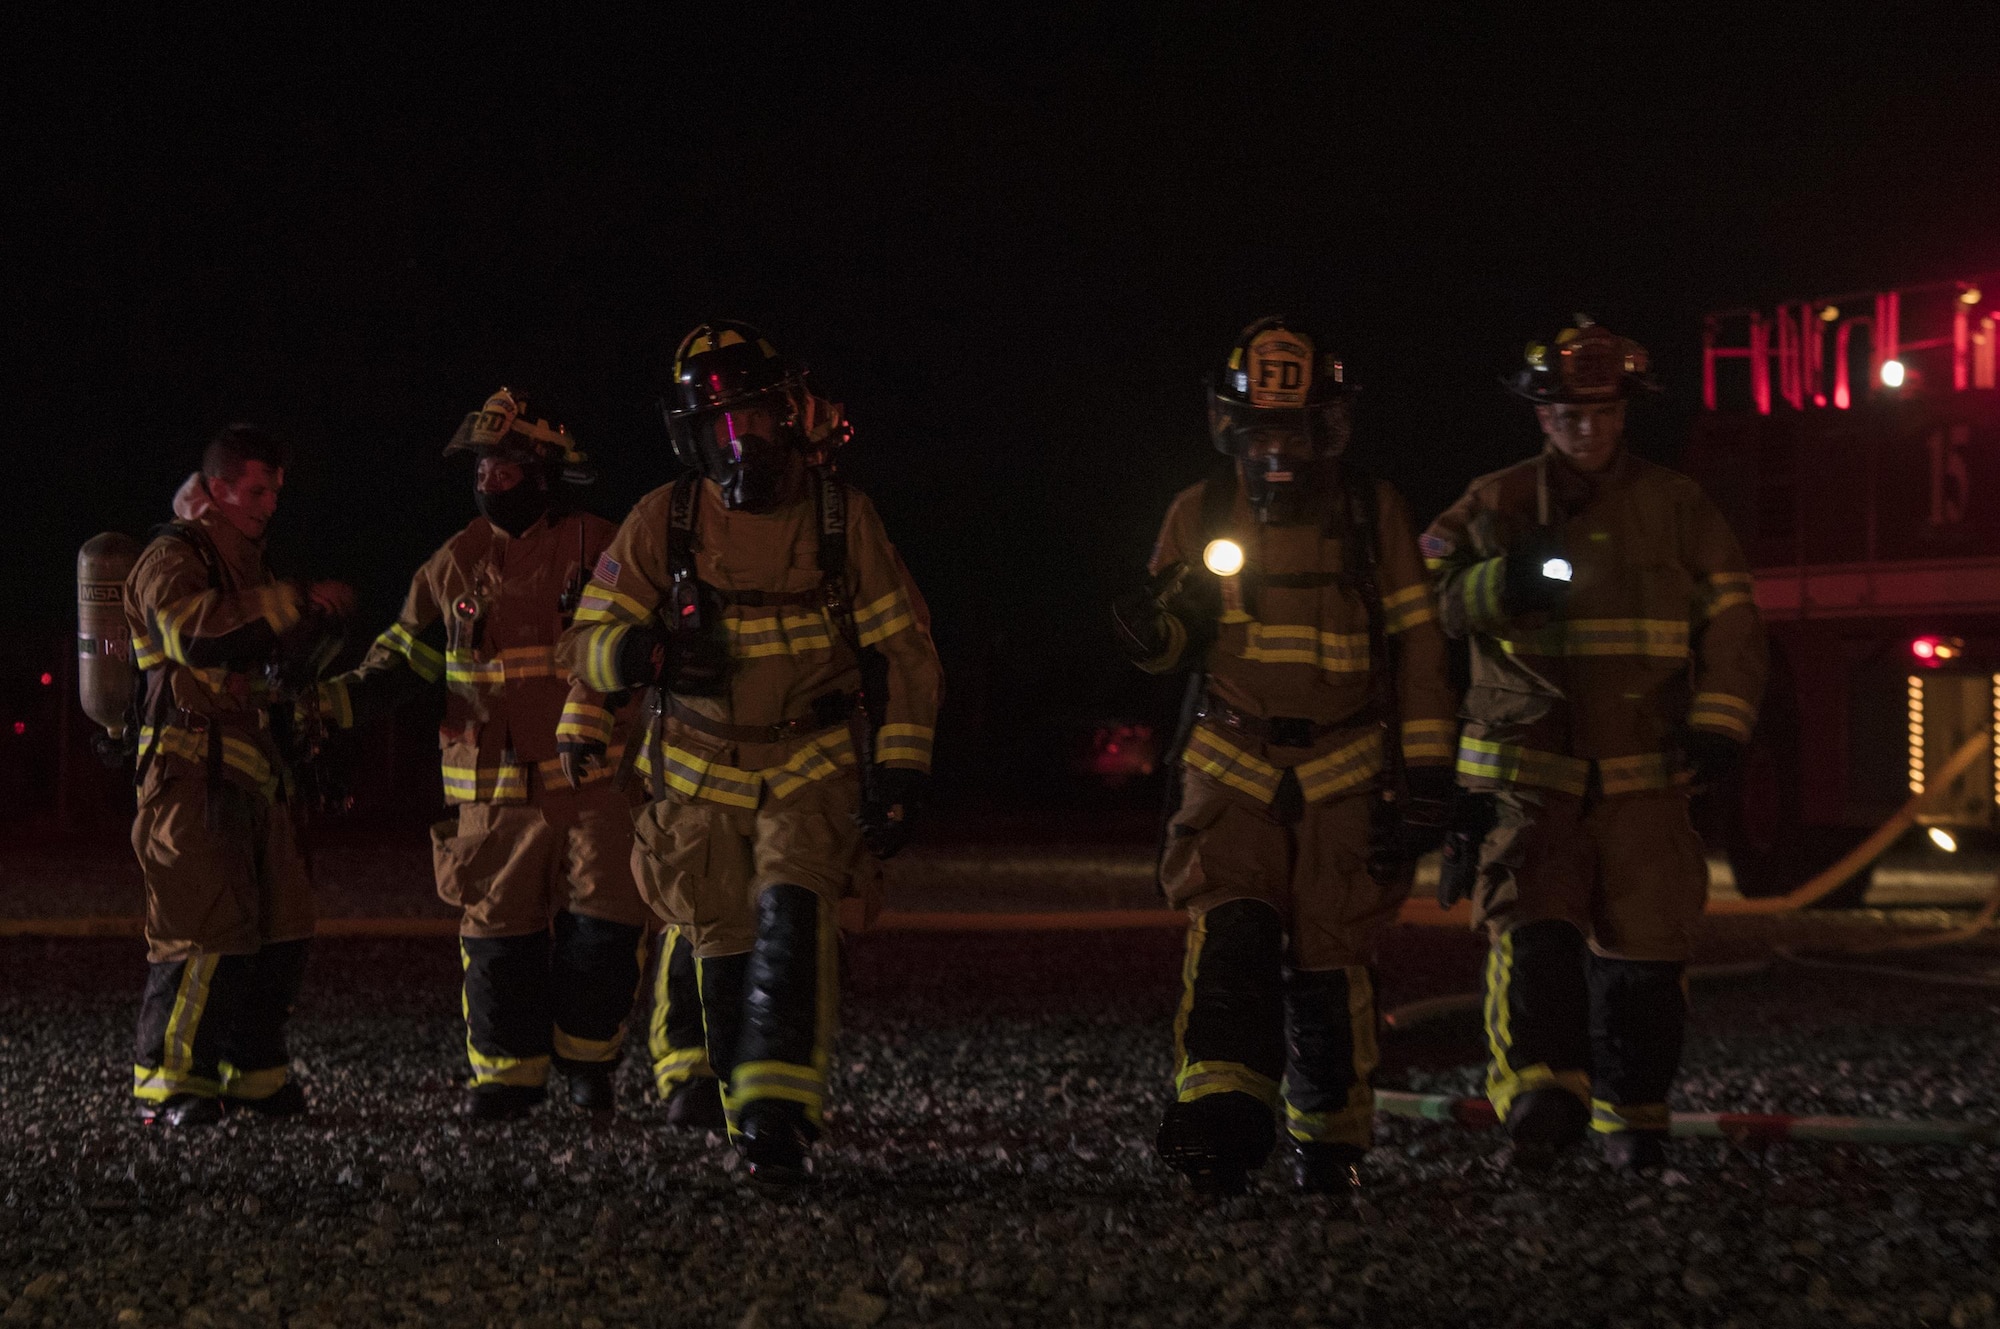 Firefighters from the 23d Civil Engineer Squadron begin to congregate after completing nighttime, live-fire training, Jan. 10, 2017, at Moody Air Force Base, Ga. It’s required by the Federal Aviation Administration that every airfield have a firefighting team on standby in case of an aircraft incident. (U.S. Air Force photo by Airman 1st Class Daniel Snider)